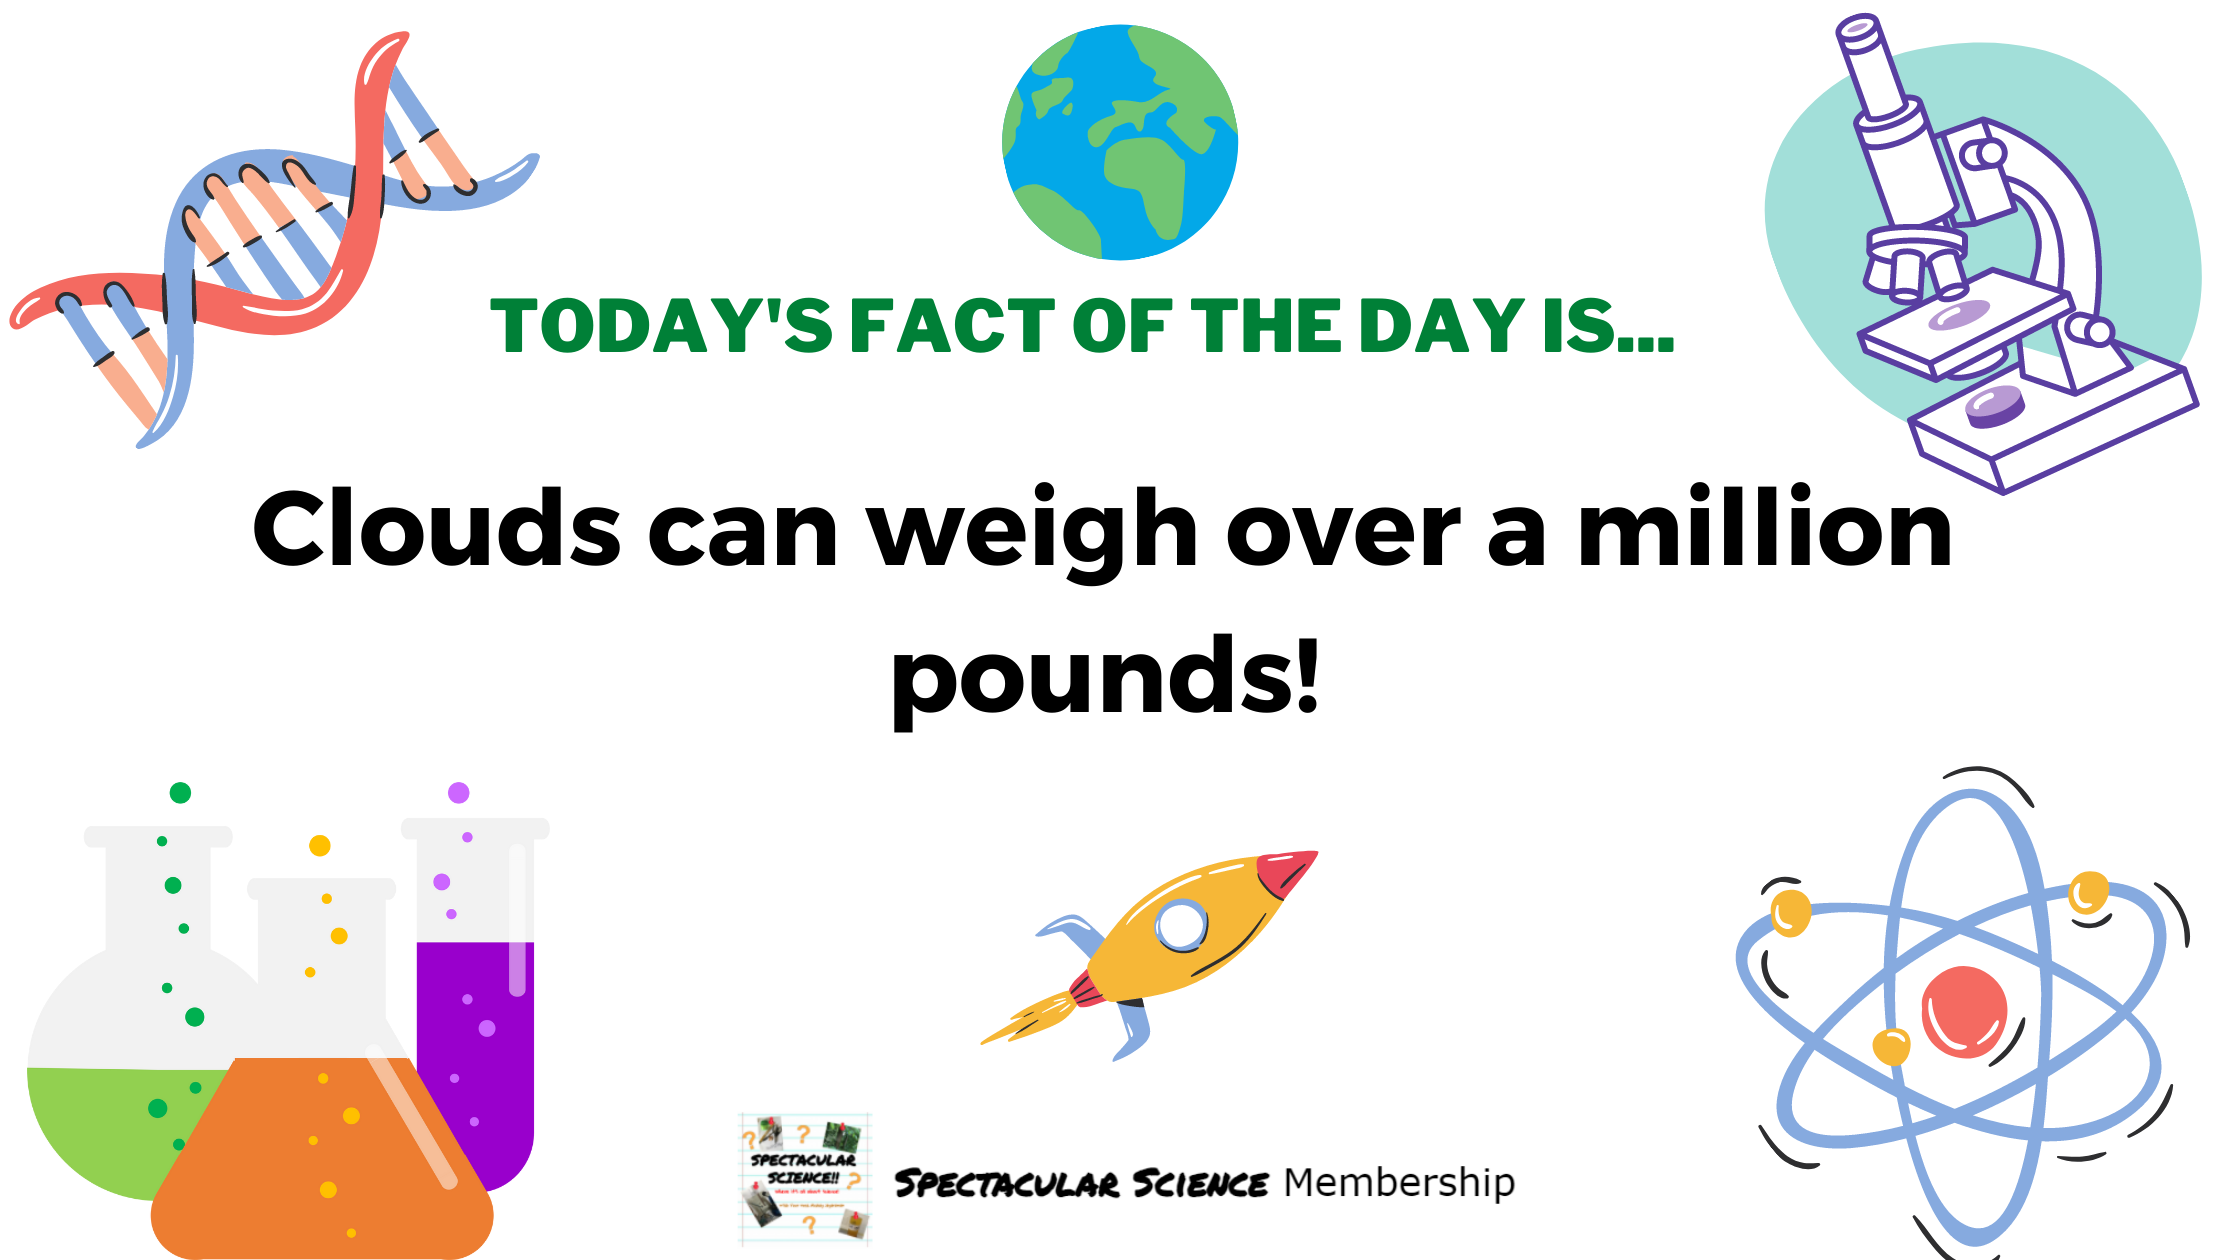 Fact of the Day Image Nov. 11th